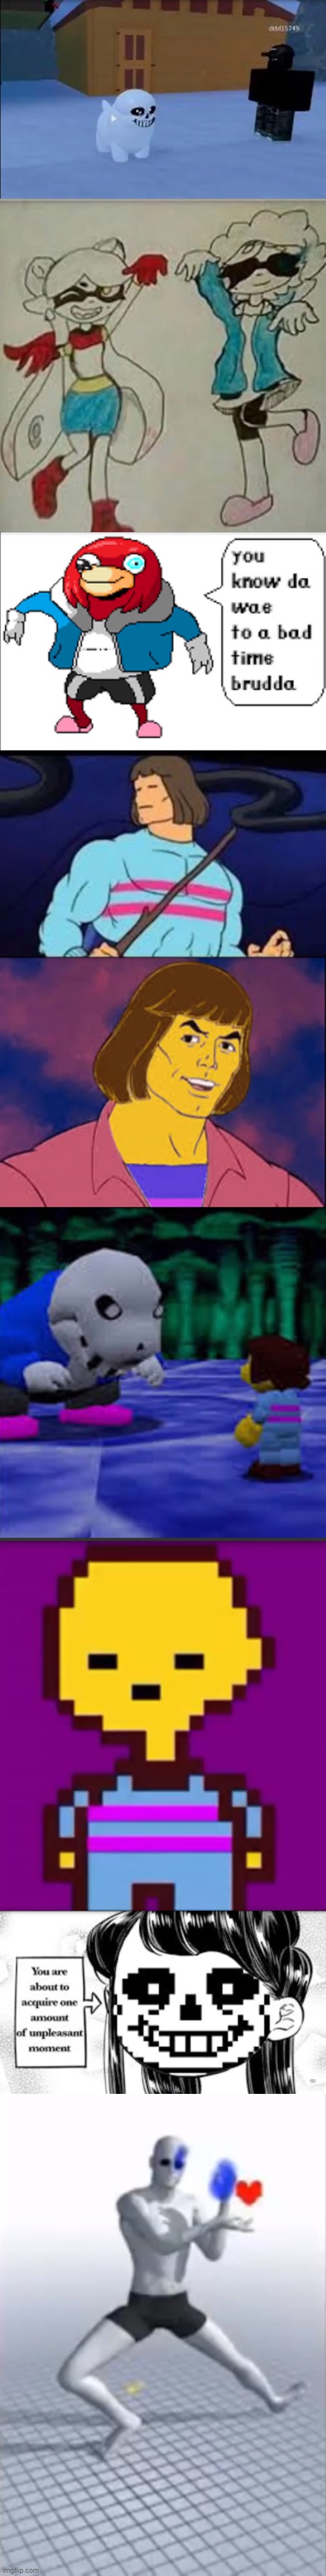 Cursed Undertale Images p3 | image tagged in cursed,undertale,images,you'll need unsee juice | made w/ Imgflip meme maker